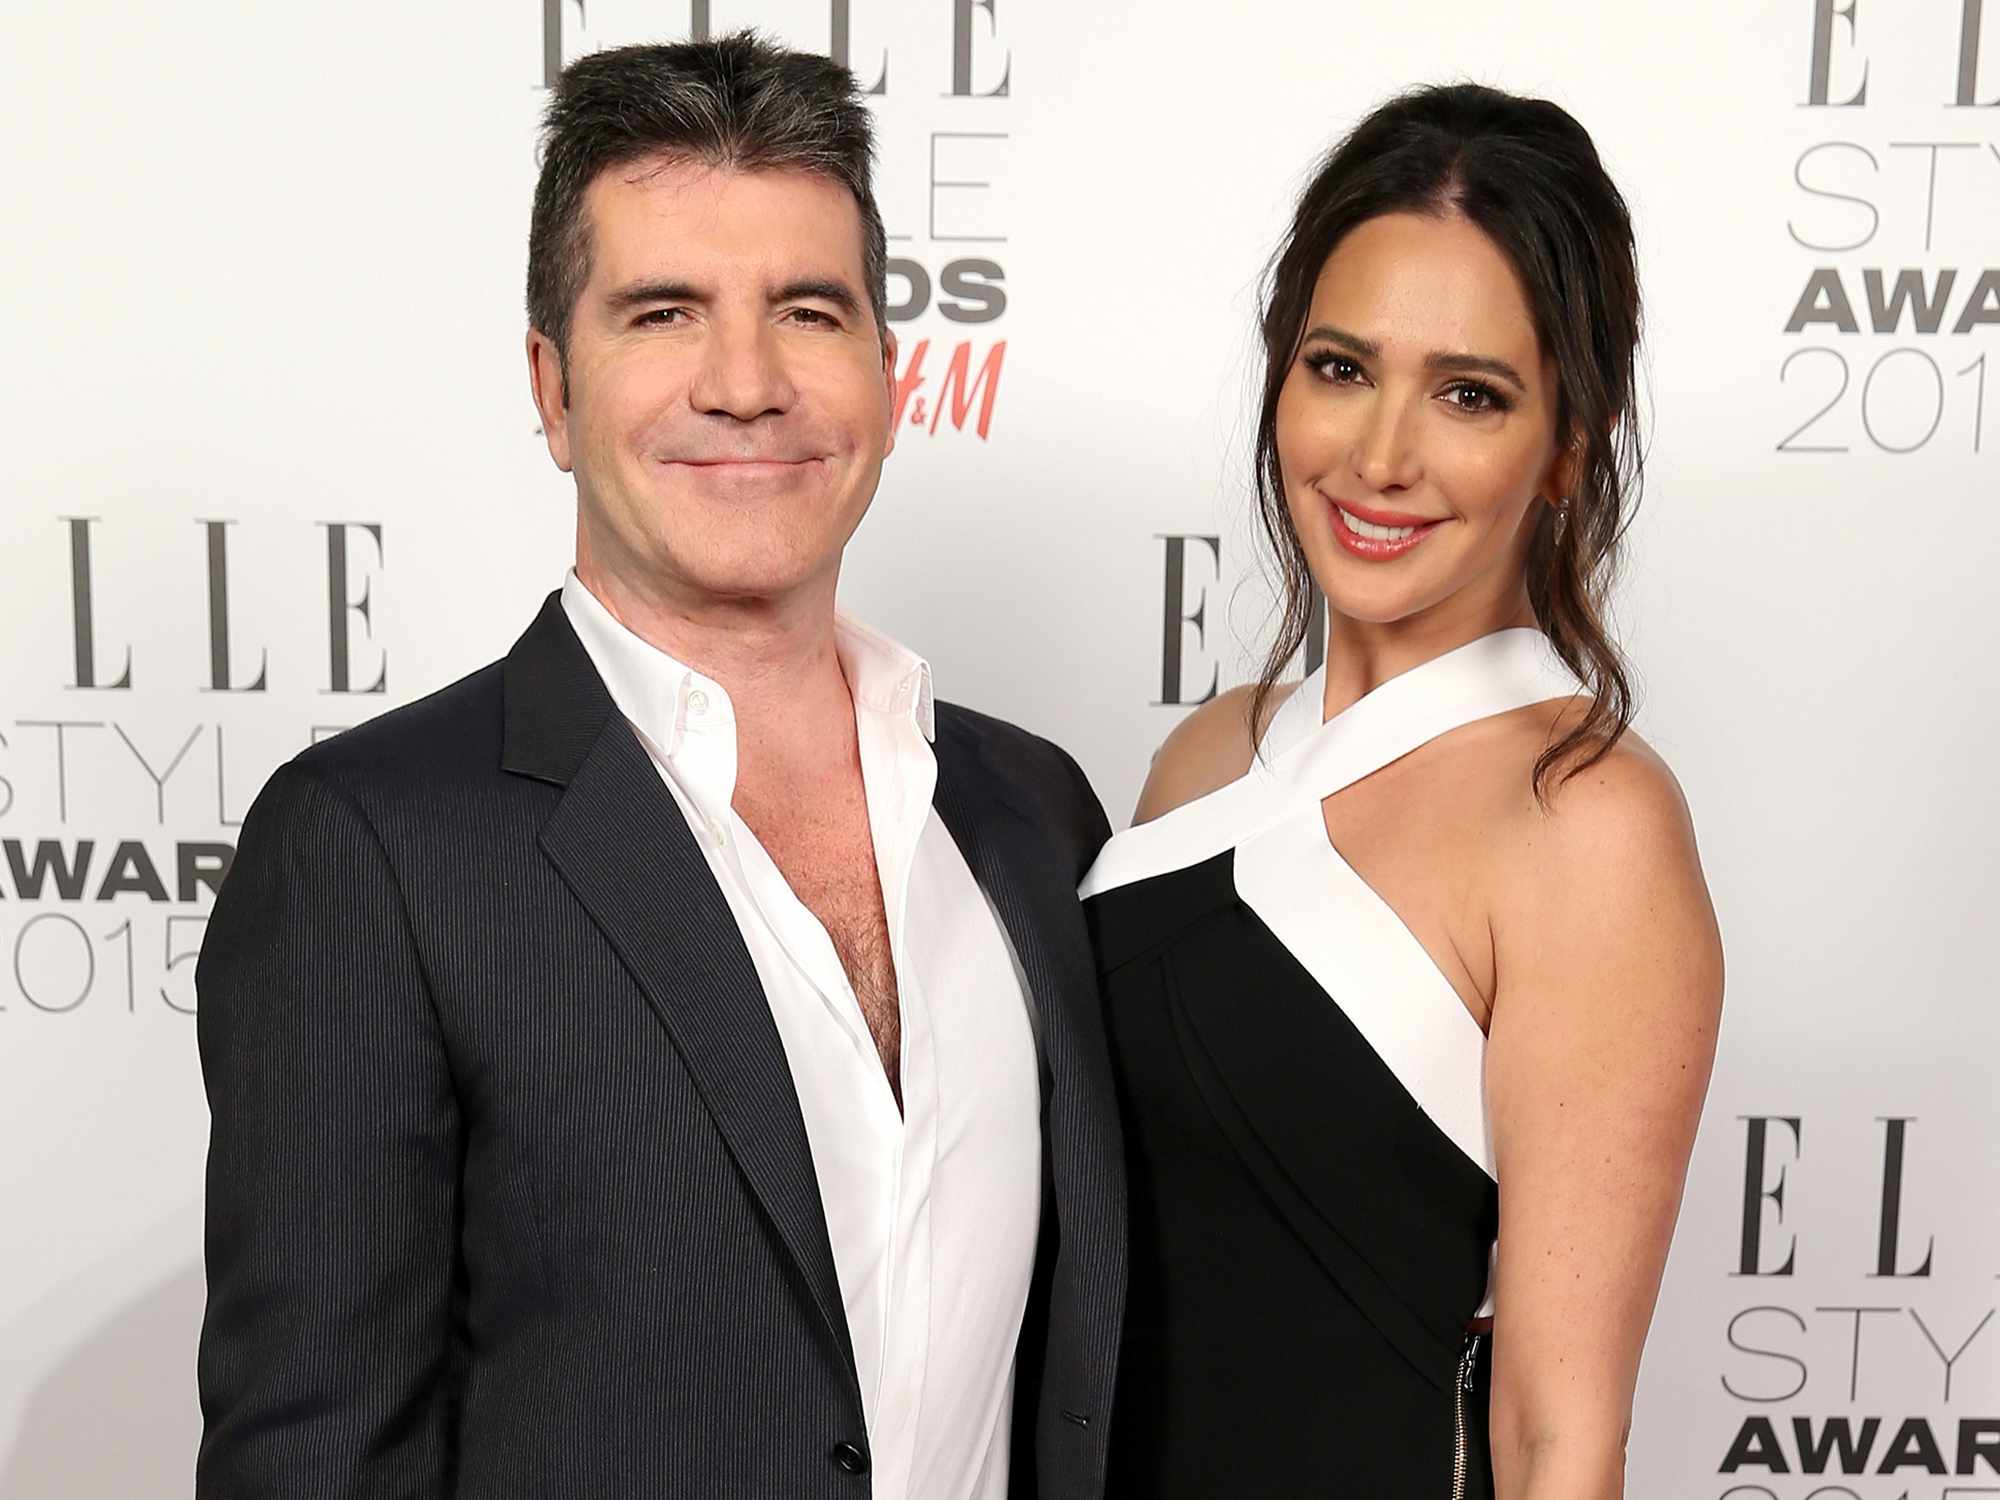 Lauren Silverman (R) poses with Simon Cowell, winner of the Outstanding Contribution to Entertainment Award, in the winners room during the Elle Style Awards 2015 at Sky Garden @ The Walkie Talkie Tower on February 24, 2015 in London, England